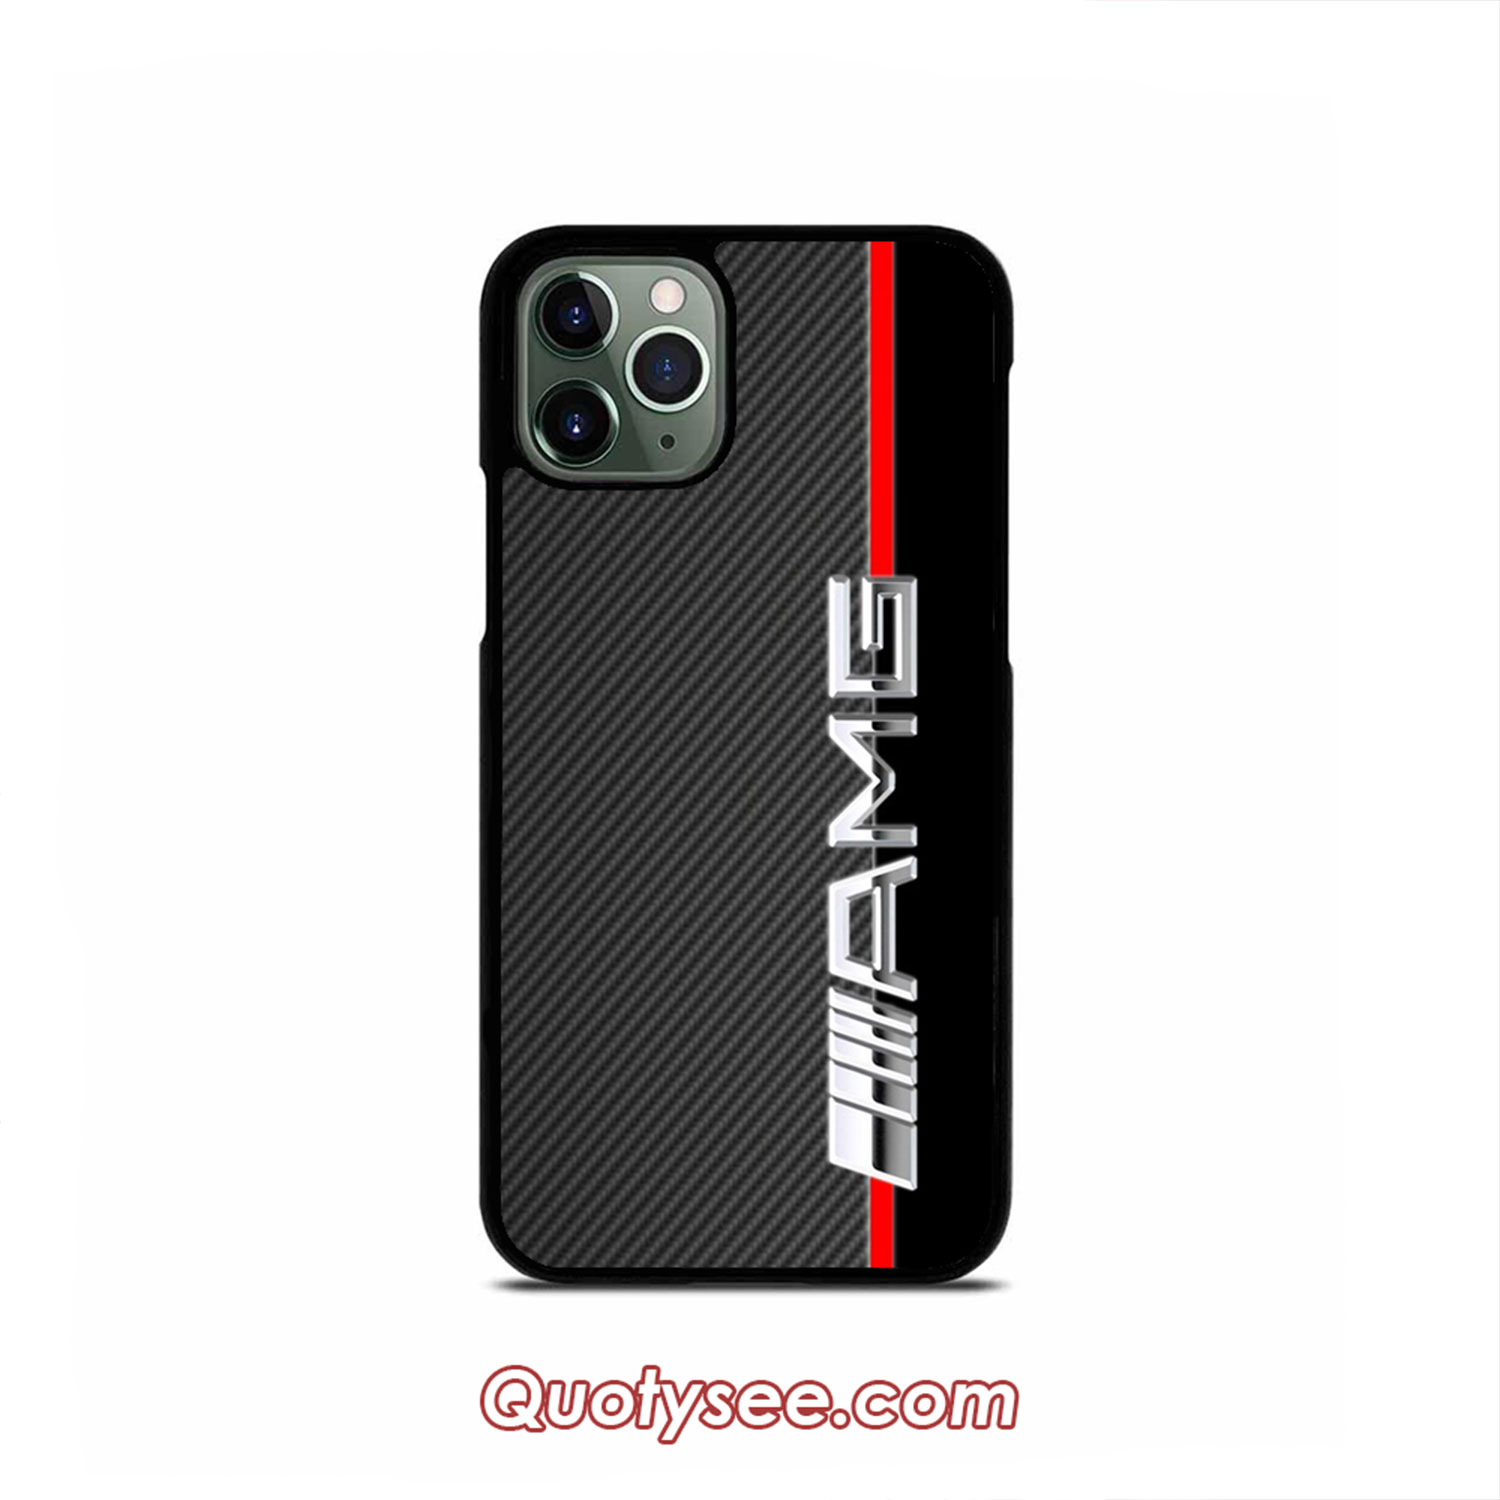 Mercedes amg Carbon Stripe iPhone Case 11/11 Pro/11 Pro Max,XS Max,XR,X,8/8 | Quotysee.com